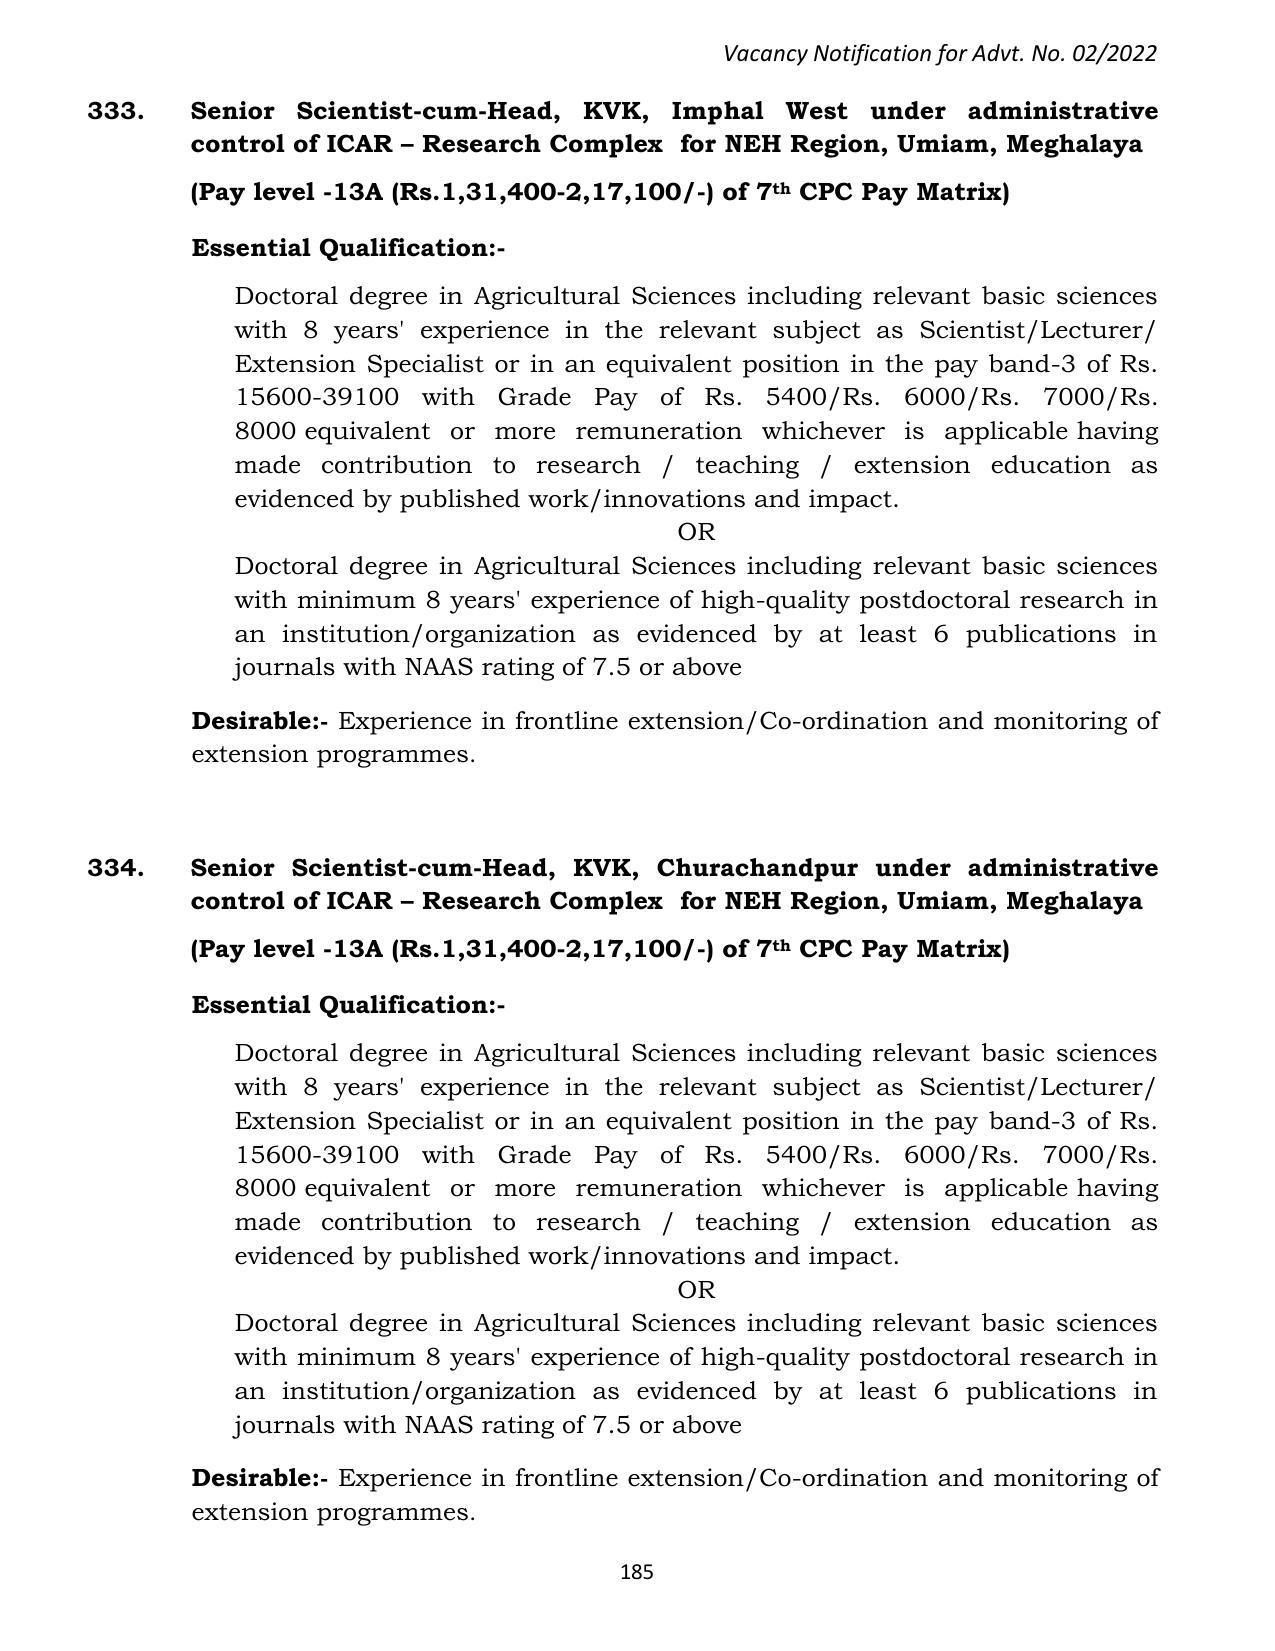 ASRB Non-Research Management Recruitment 2022 - Page 154